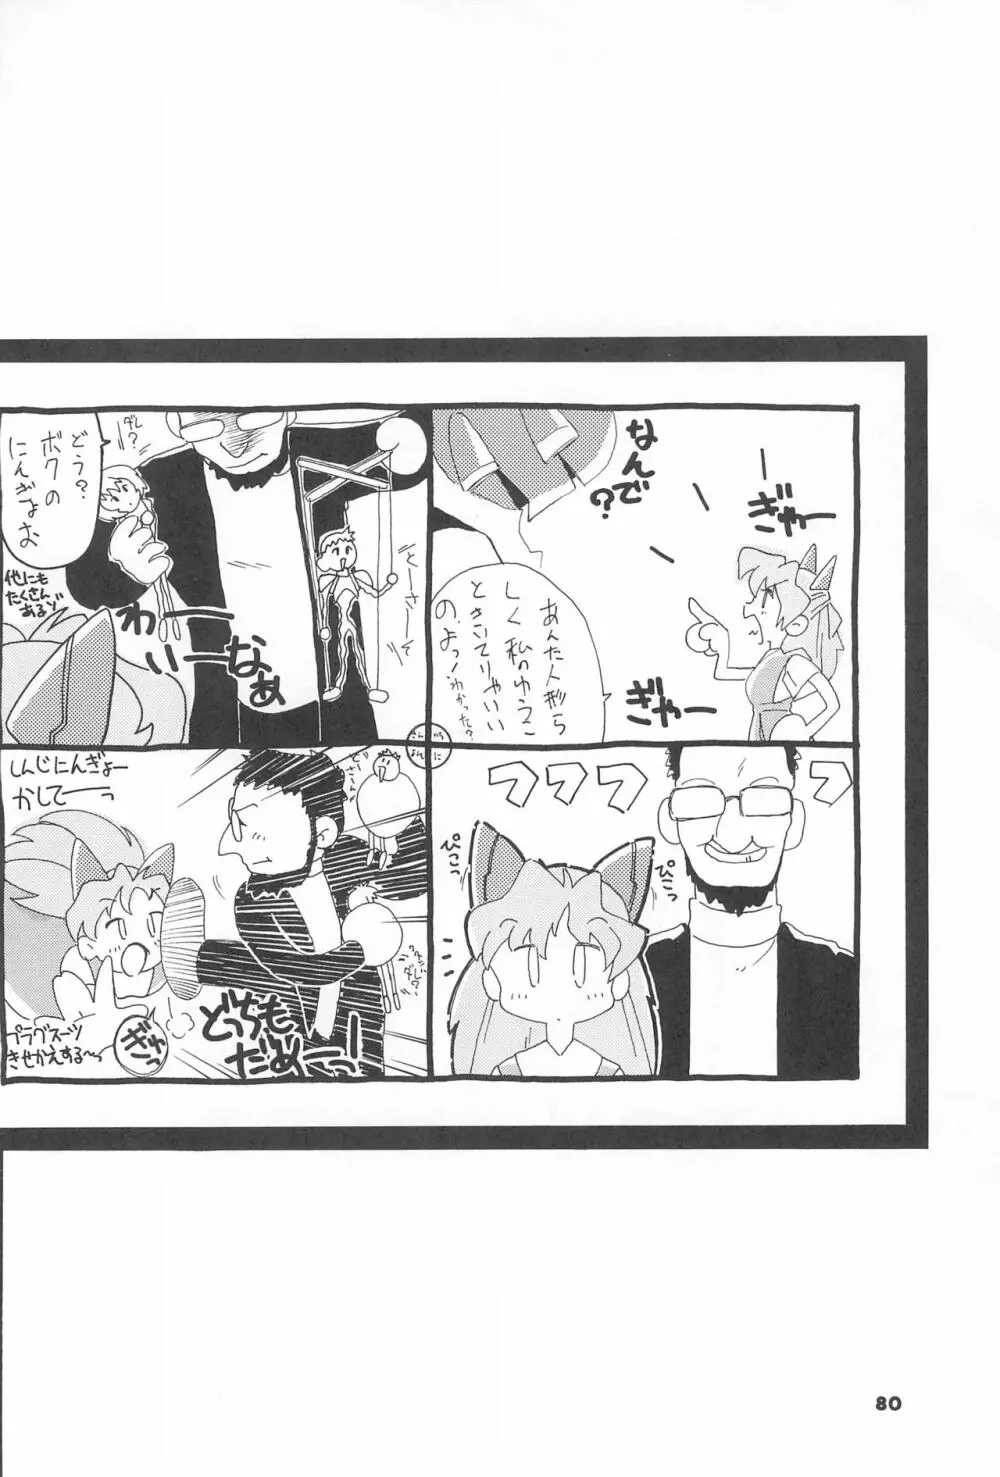 ASTRA NOAT 2 Page.82